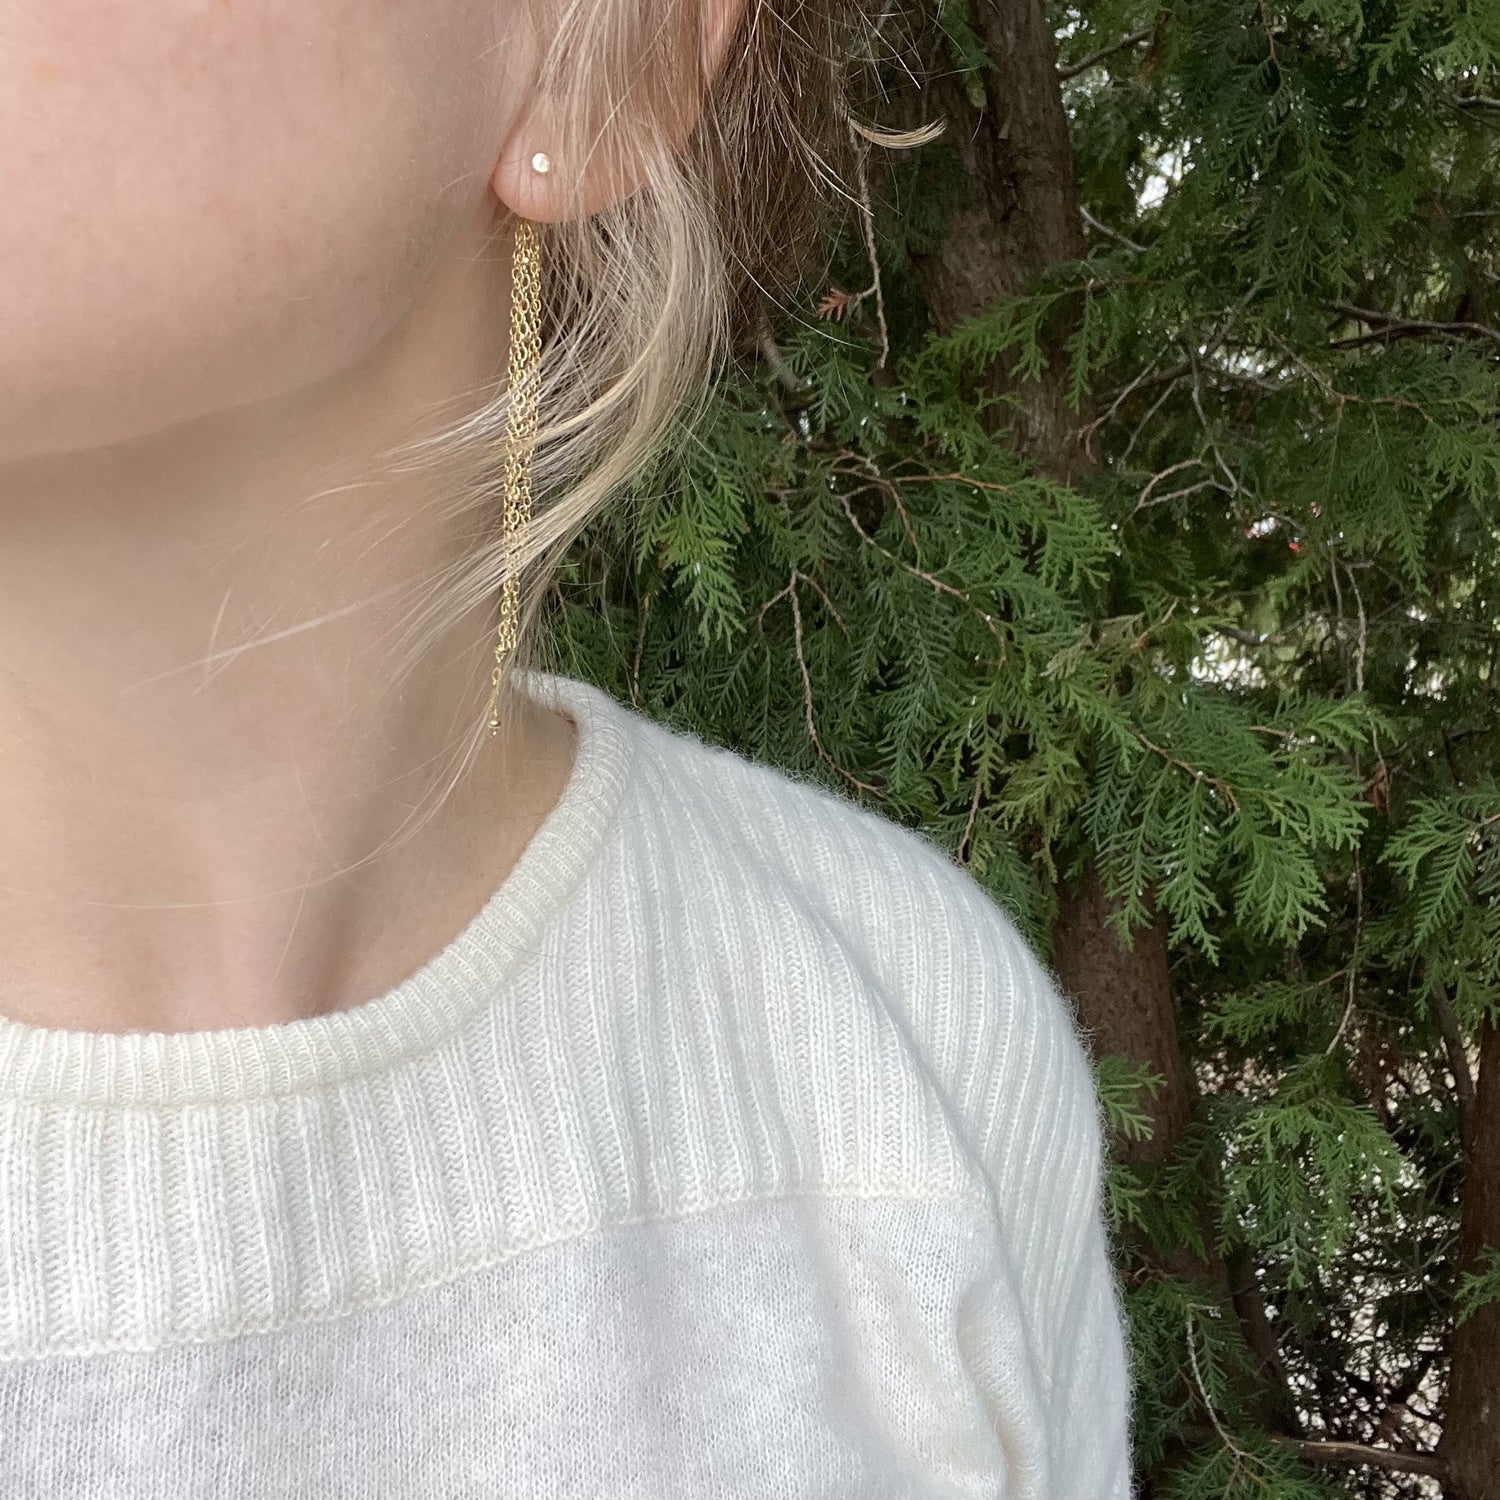 stud earrings with chain ear jacket in 14k gold fill, being modeled by a person in a white sweater